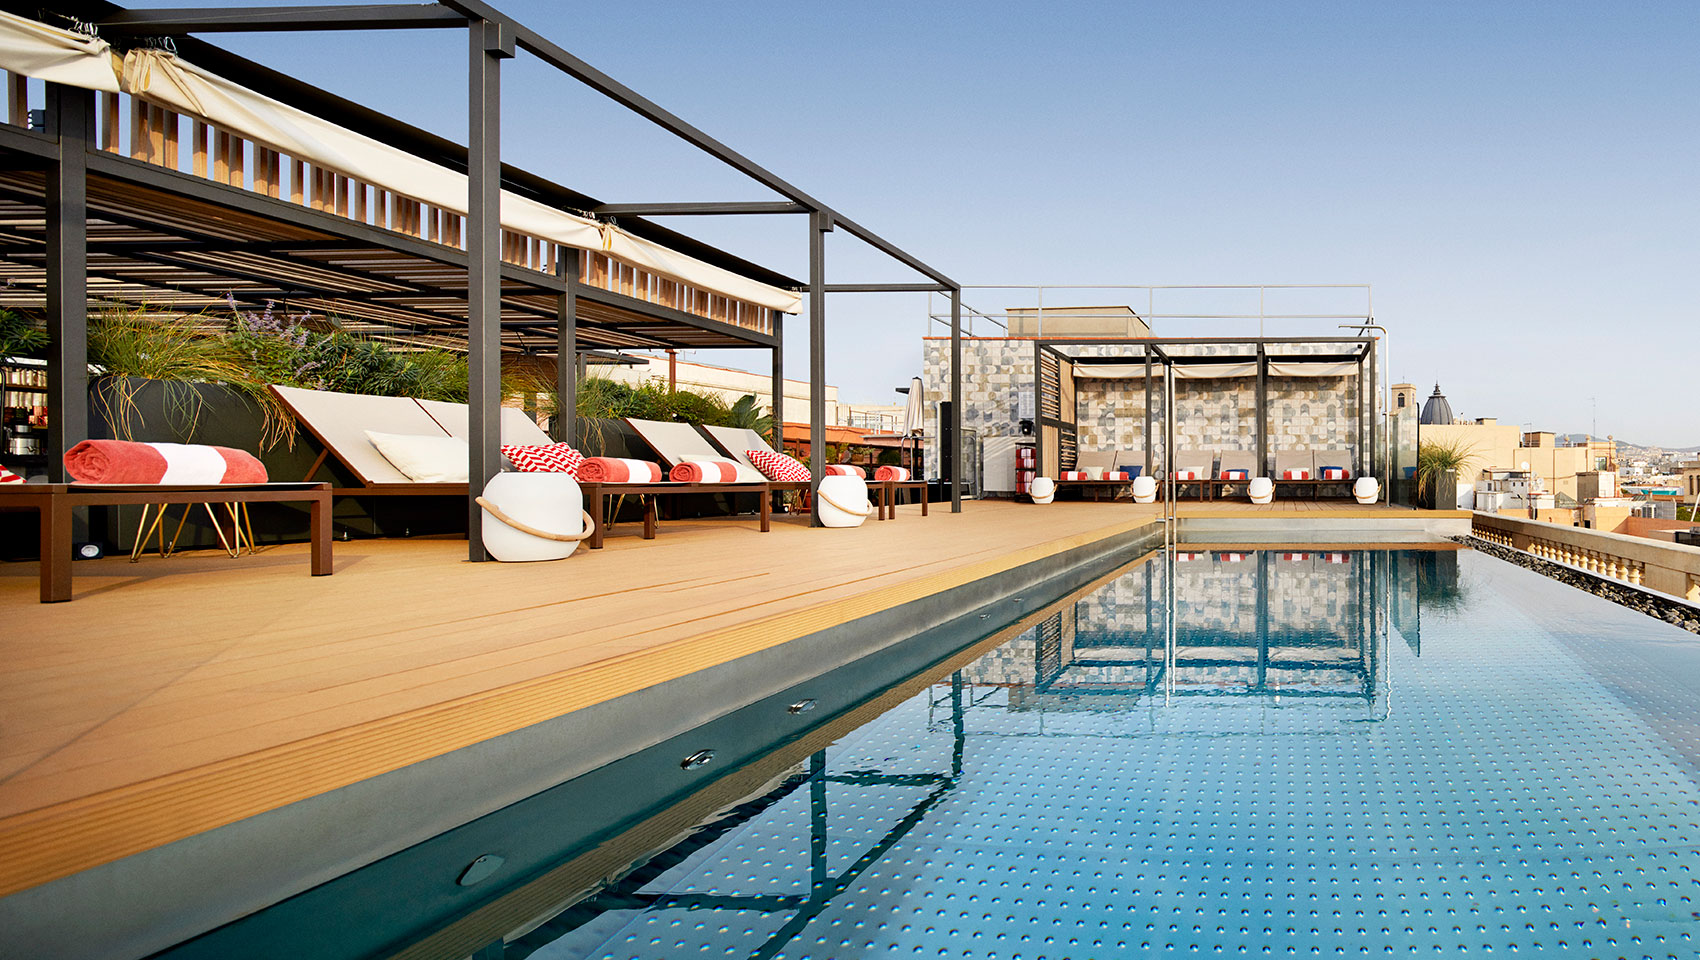  Infinity pool on the seventh floor with 360 views of Barcelona